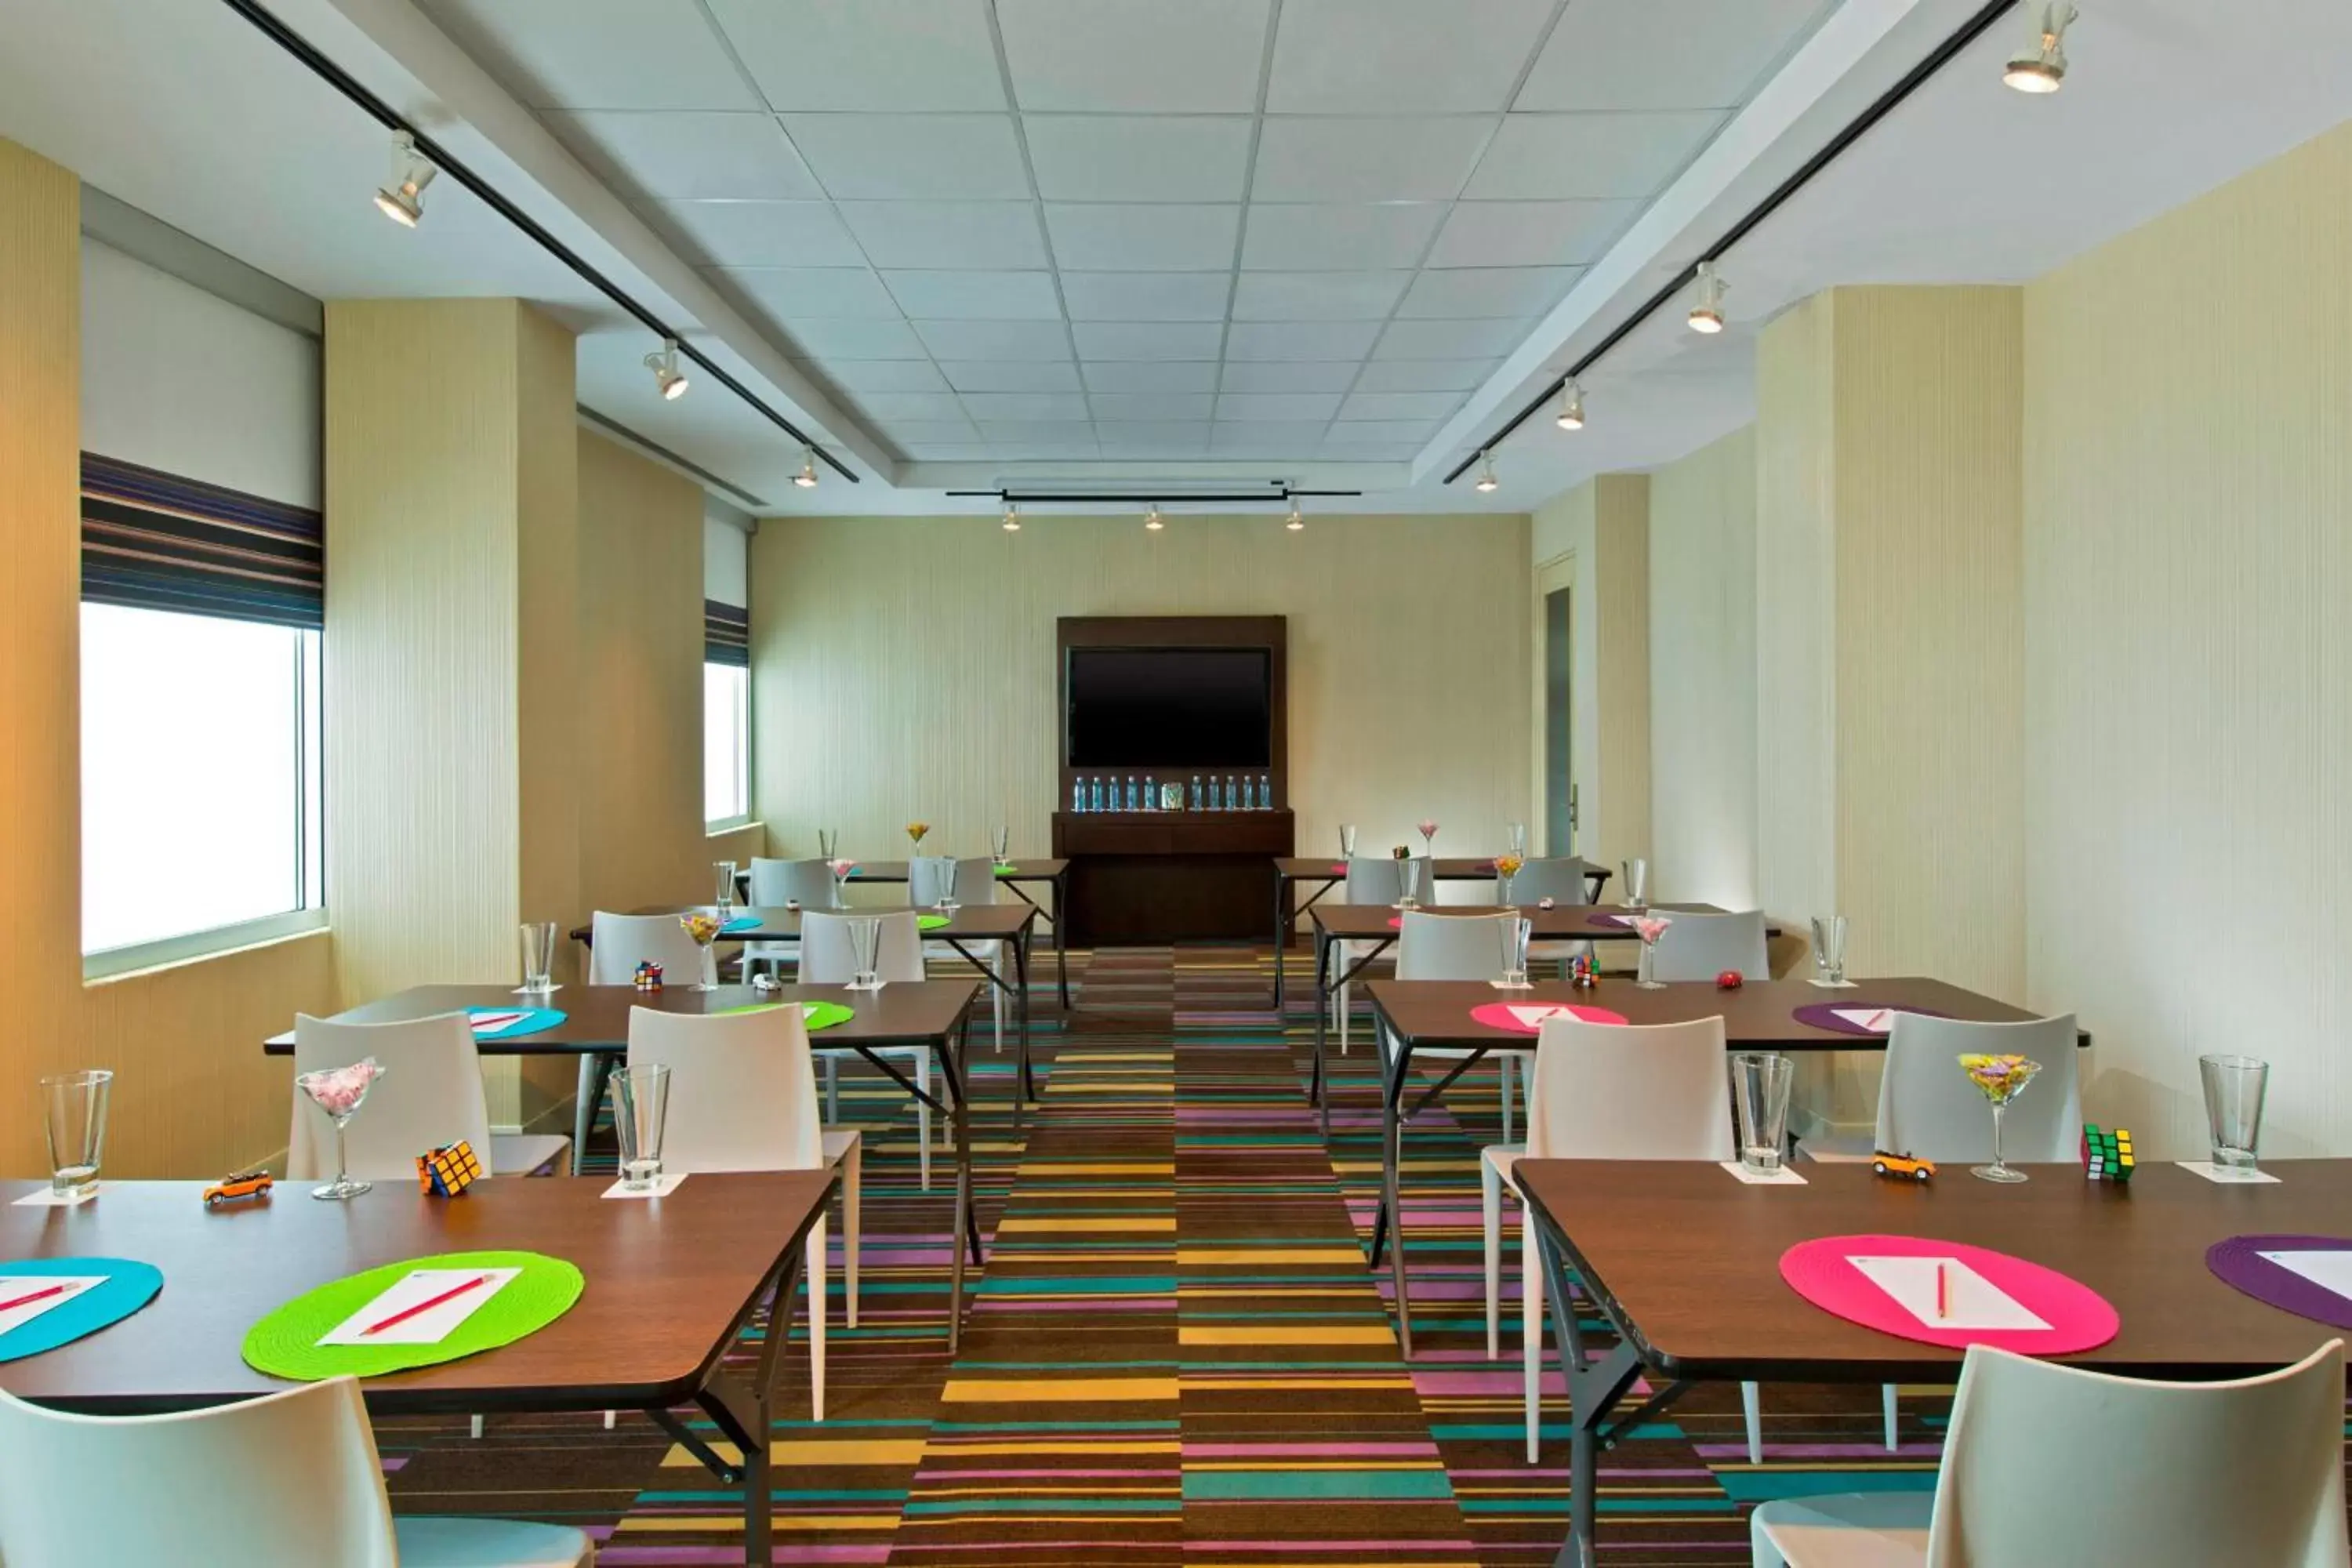 Meeting/conference room in Aloft San Jose Hotel, Costa Rica